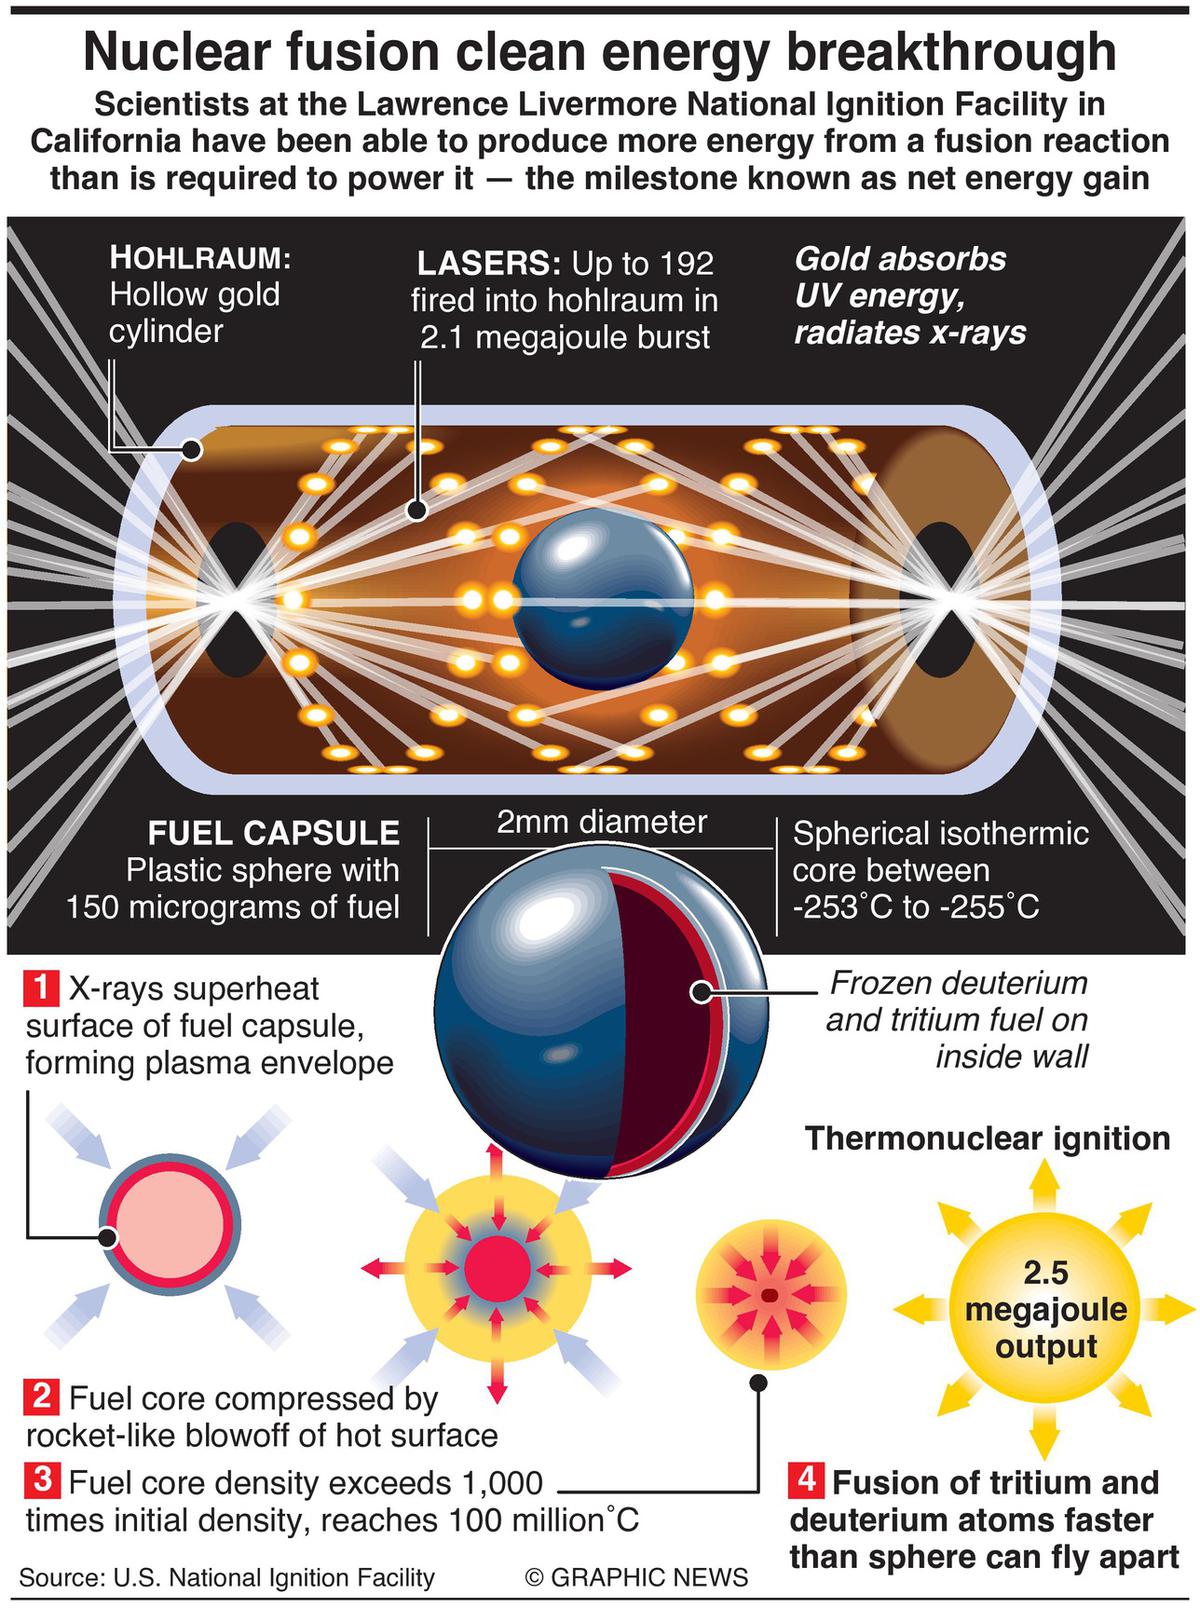 December 13, 2022, U.S. Energy secretary Jennifer Granholm and under-secretary for nuclear security Jill Hruby are due to announce a major scientific breakthrough in nuclear fusion after 50 years of research. Graphic shows how inertial confinement fusion works. nuclear clean energy